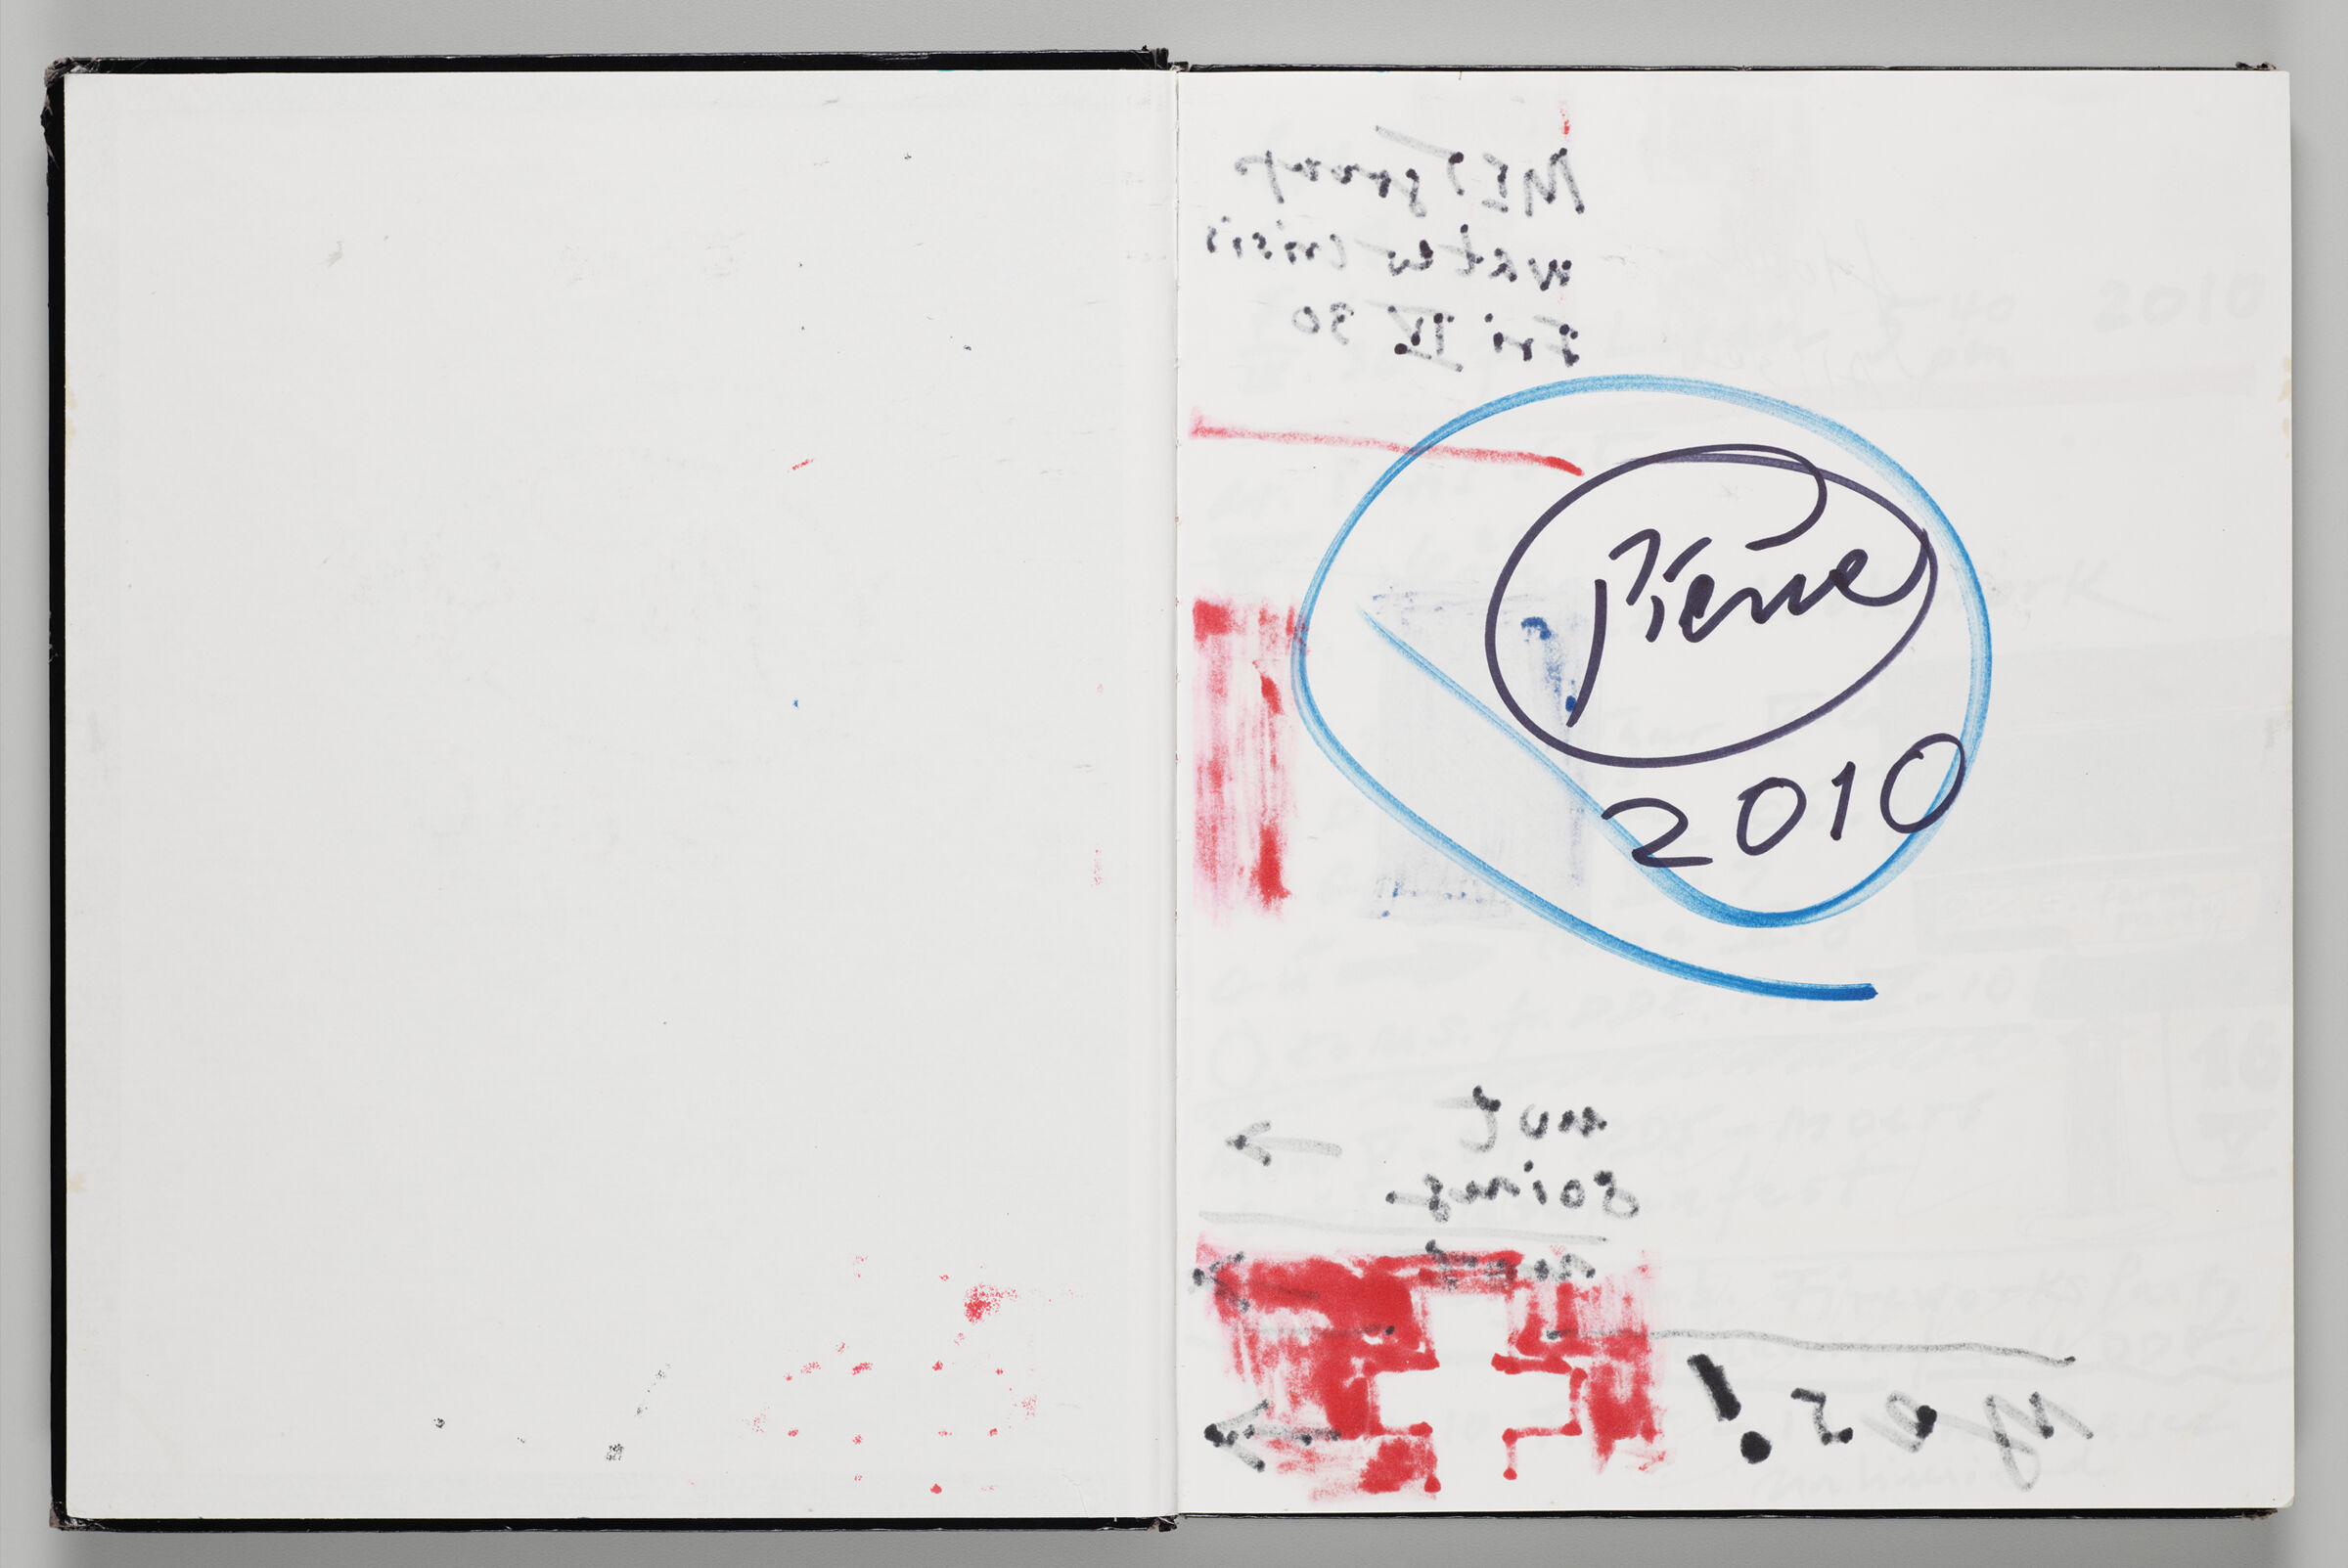 Untitled (Front Endpaper With Color Transfer, Left Page); Untitled (Signature Page And Bleed-Through Of Following Page, Right Page)